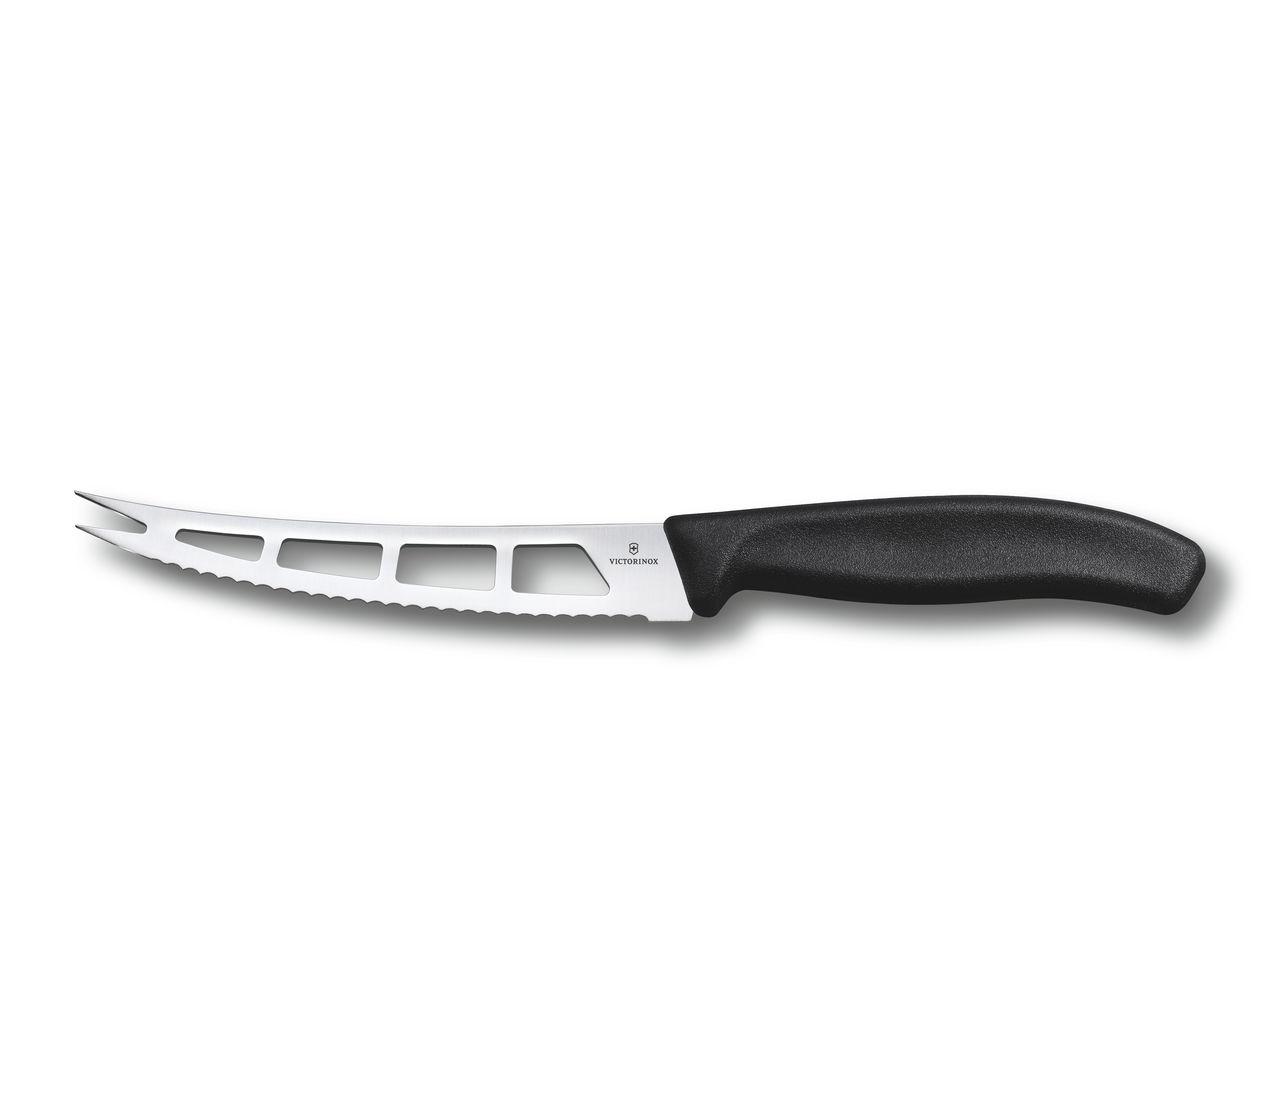 Cheese Knife, Stainless Steel Forked Cheese Knife, All Purpose Cheese Knife,  Cheese Spreader, Gift Add On 